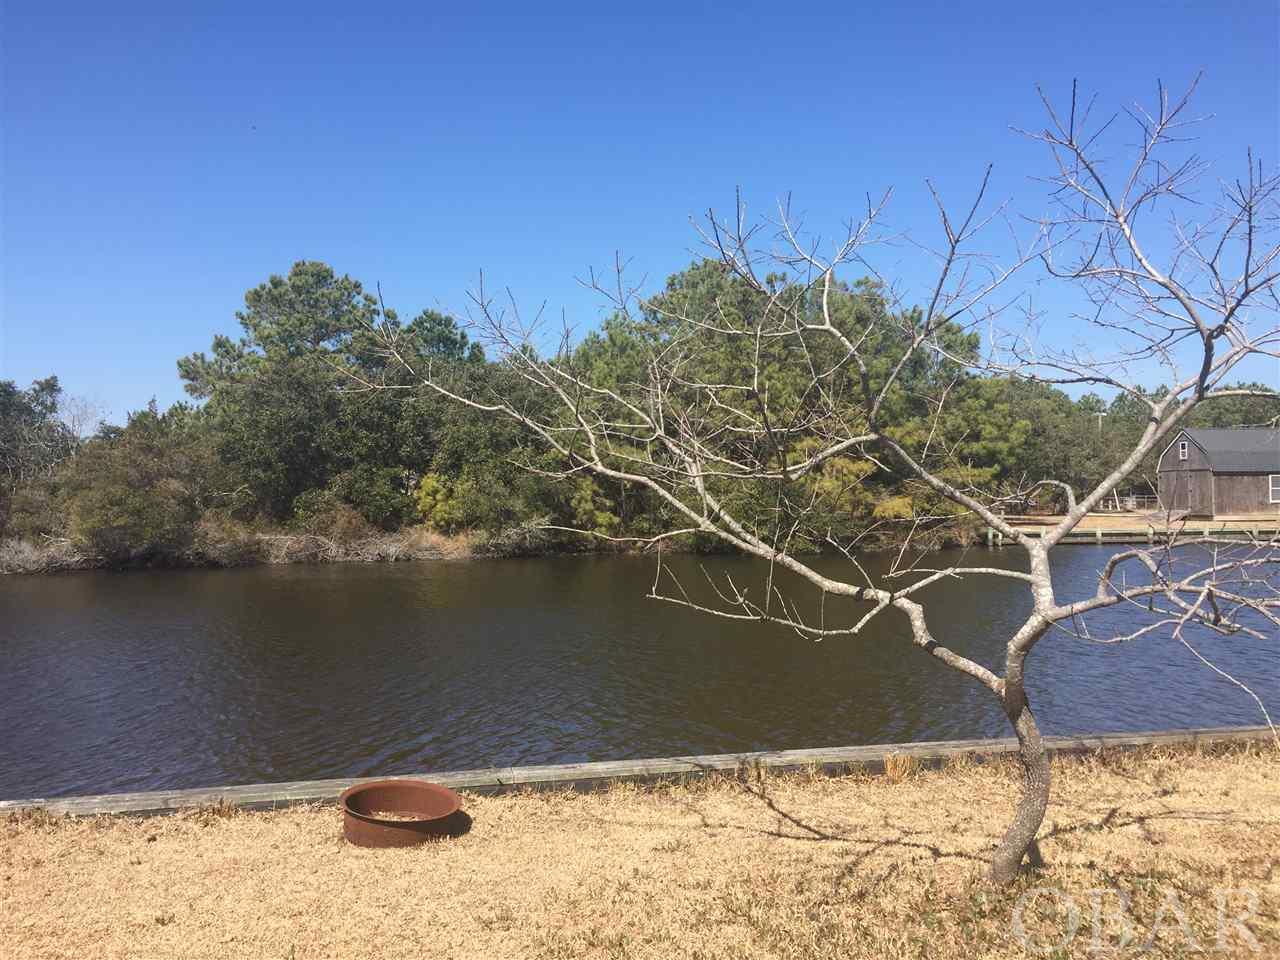 Lovely canalfront lot.  Lots of horse traffic in this area, quiet and beautiful.  Blackberry bushes in the summer, live oaks and other native trees.  An easy drive from Ocean Pearl Rd with canal frontage and a bulkhead.  Lots of possibilities here.